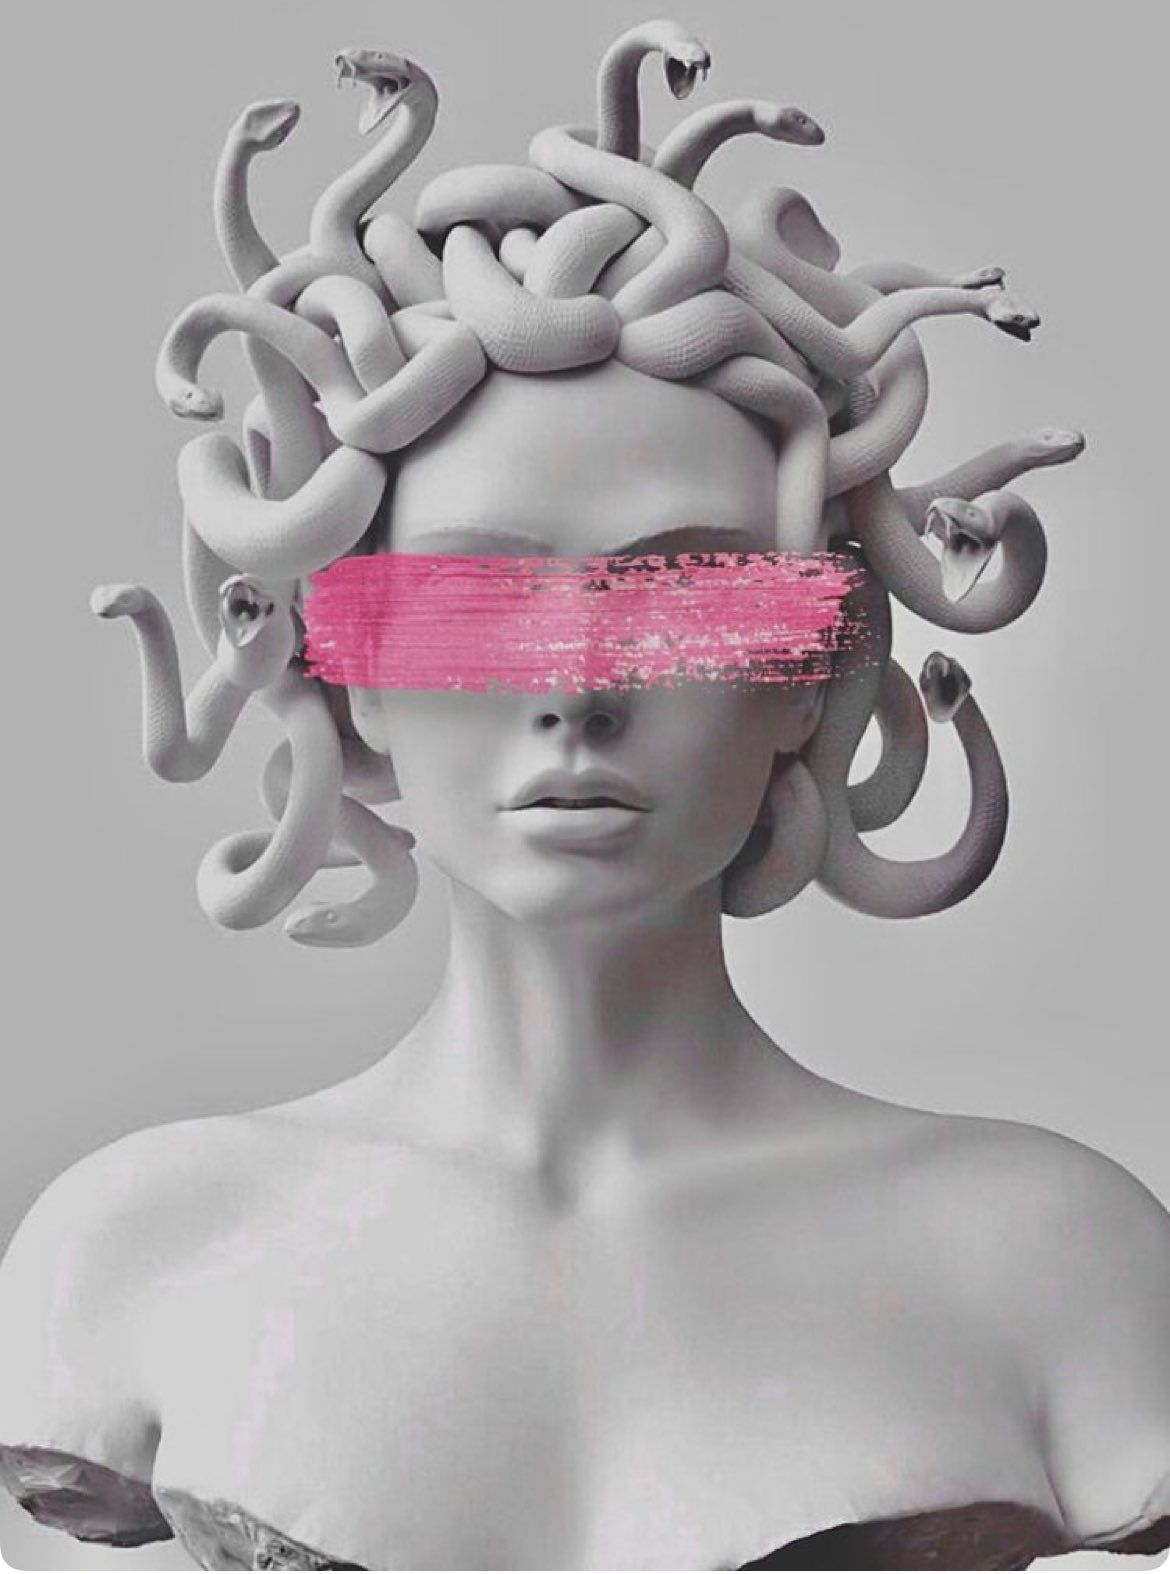 A sculpture of a woman with snakes for hair and a pink stripe across her eyes. - Medusa